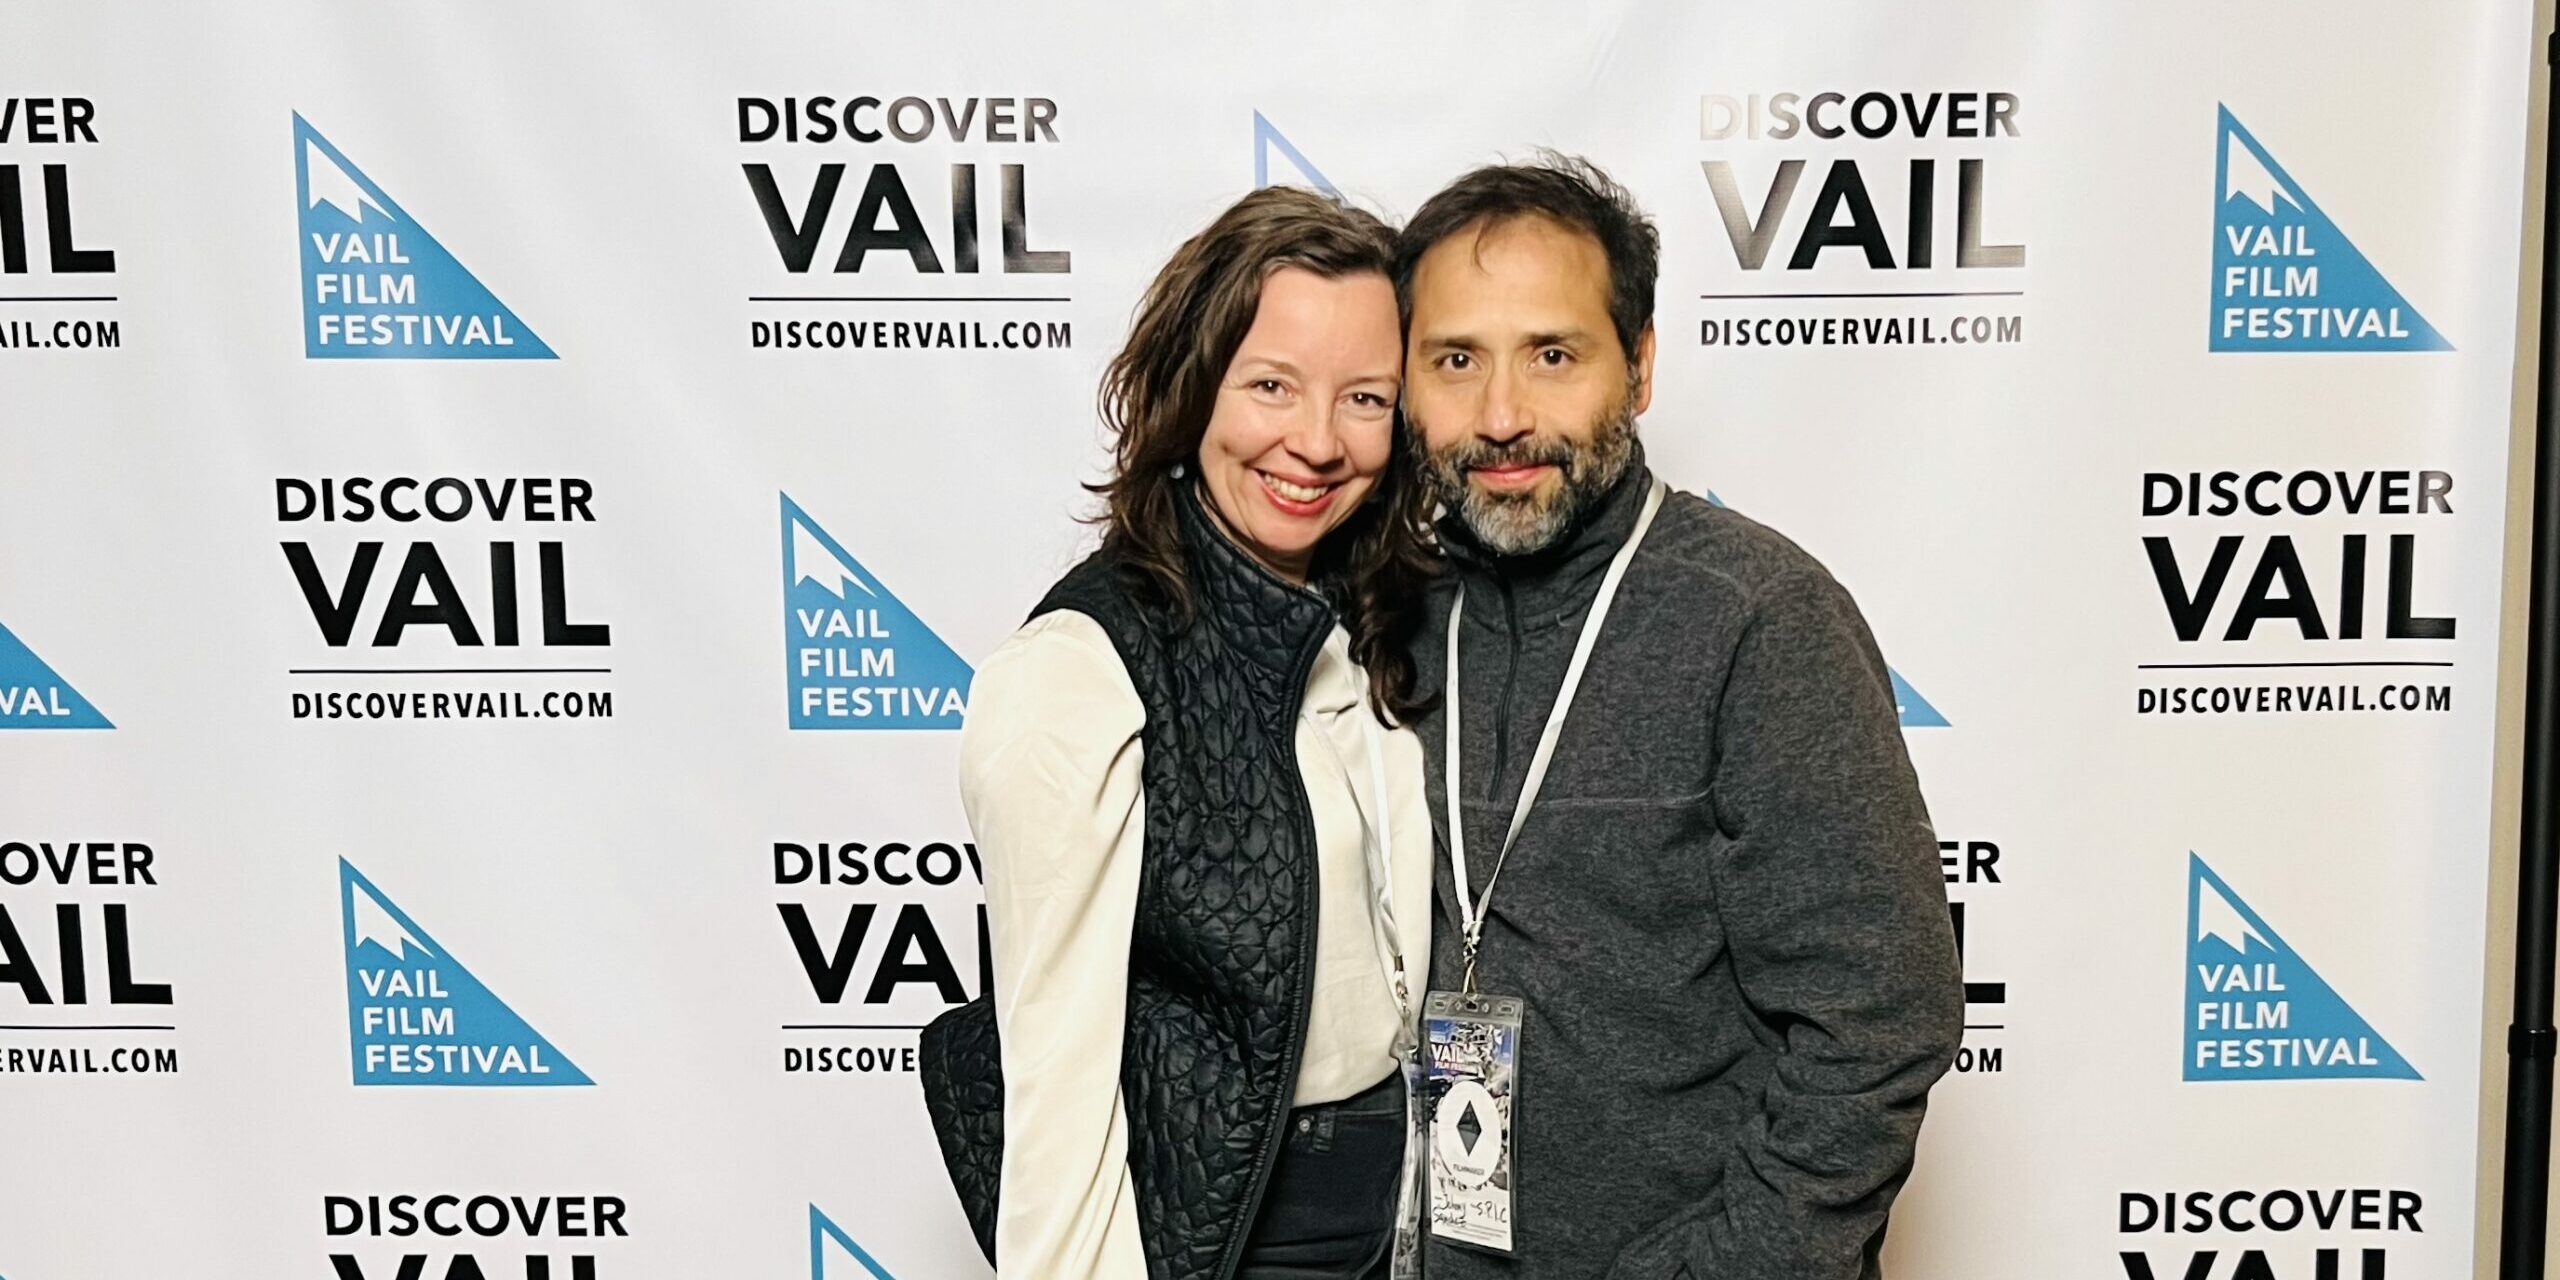 Heidi Marshall and Johnny Sanchez posing in front of step-and-repeat at Vail Film Festival for premiere of S.P.I.C. short film